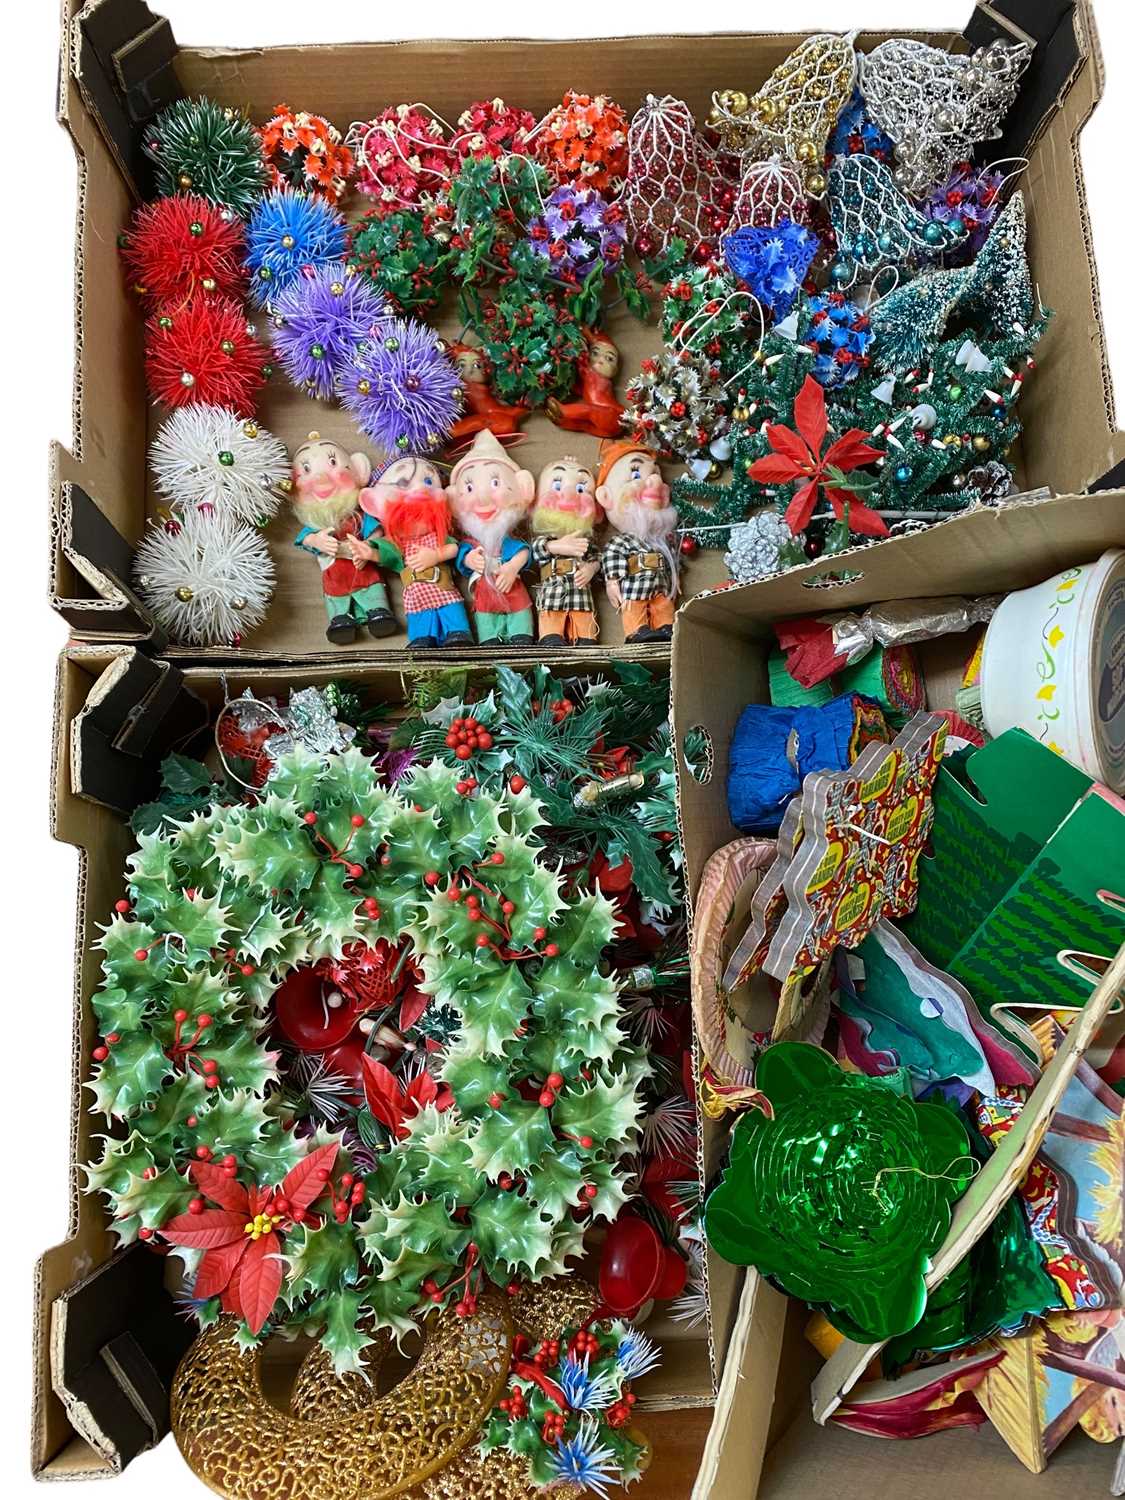 VINTAGE CHRISTMAS DECORATIONS - mid-century honeycomb paper decorations and streamers, figures to